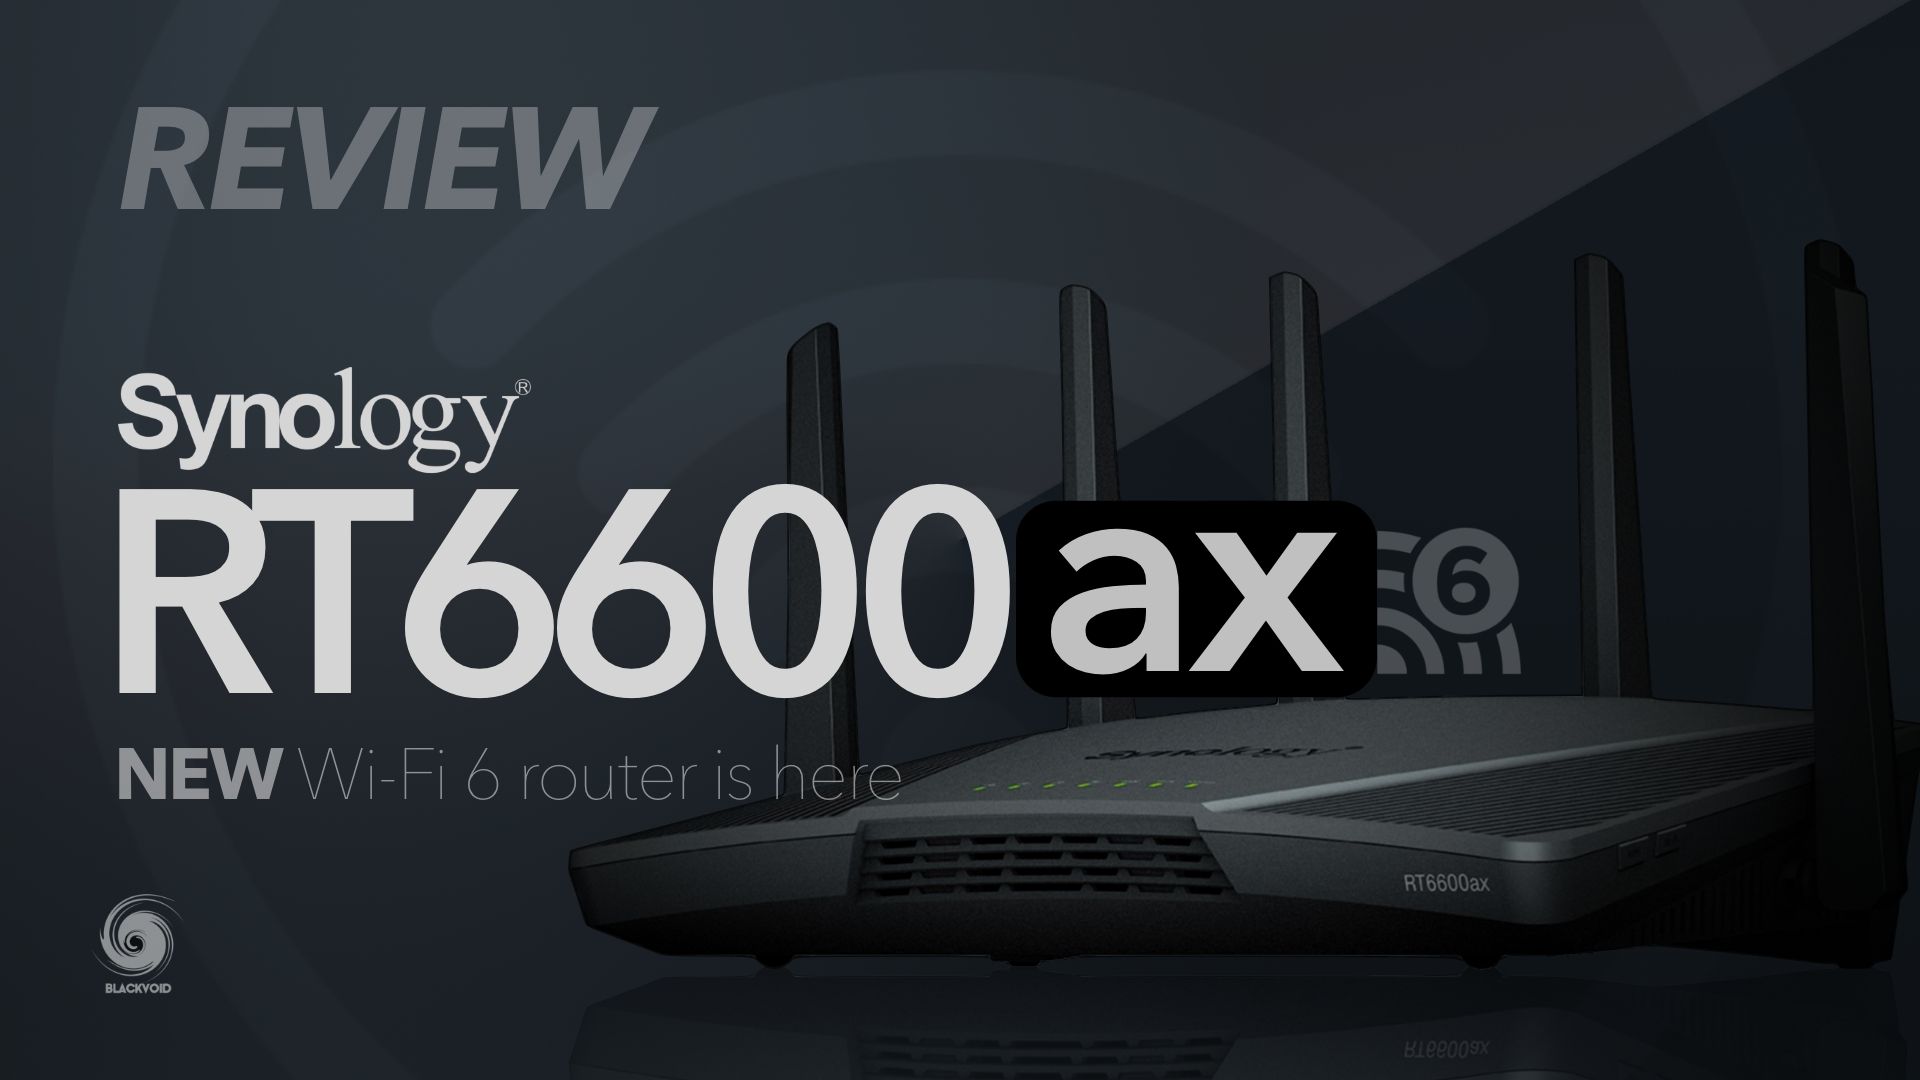 RT6600ax - NEW router for the Wi-Fi 6 era